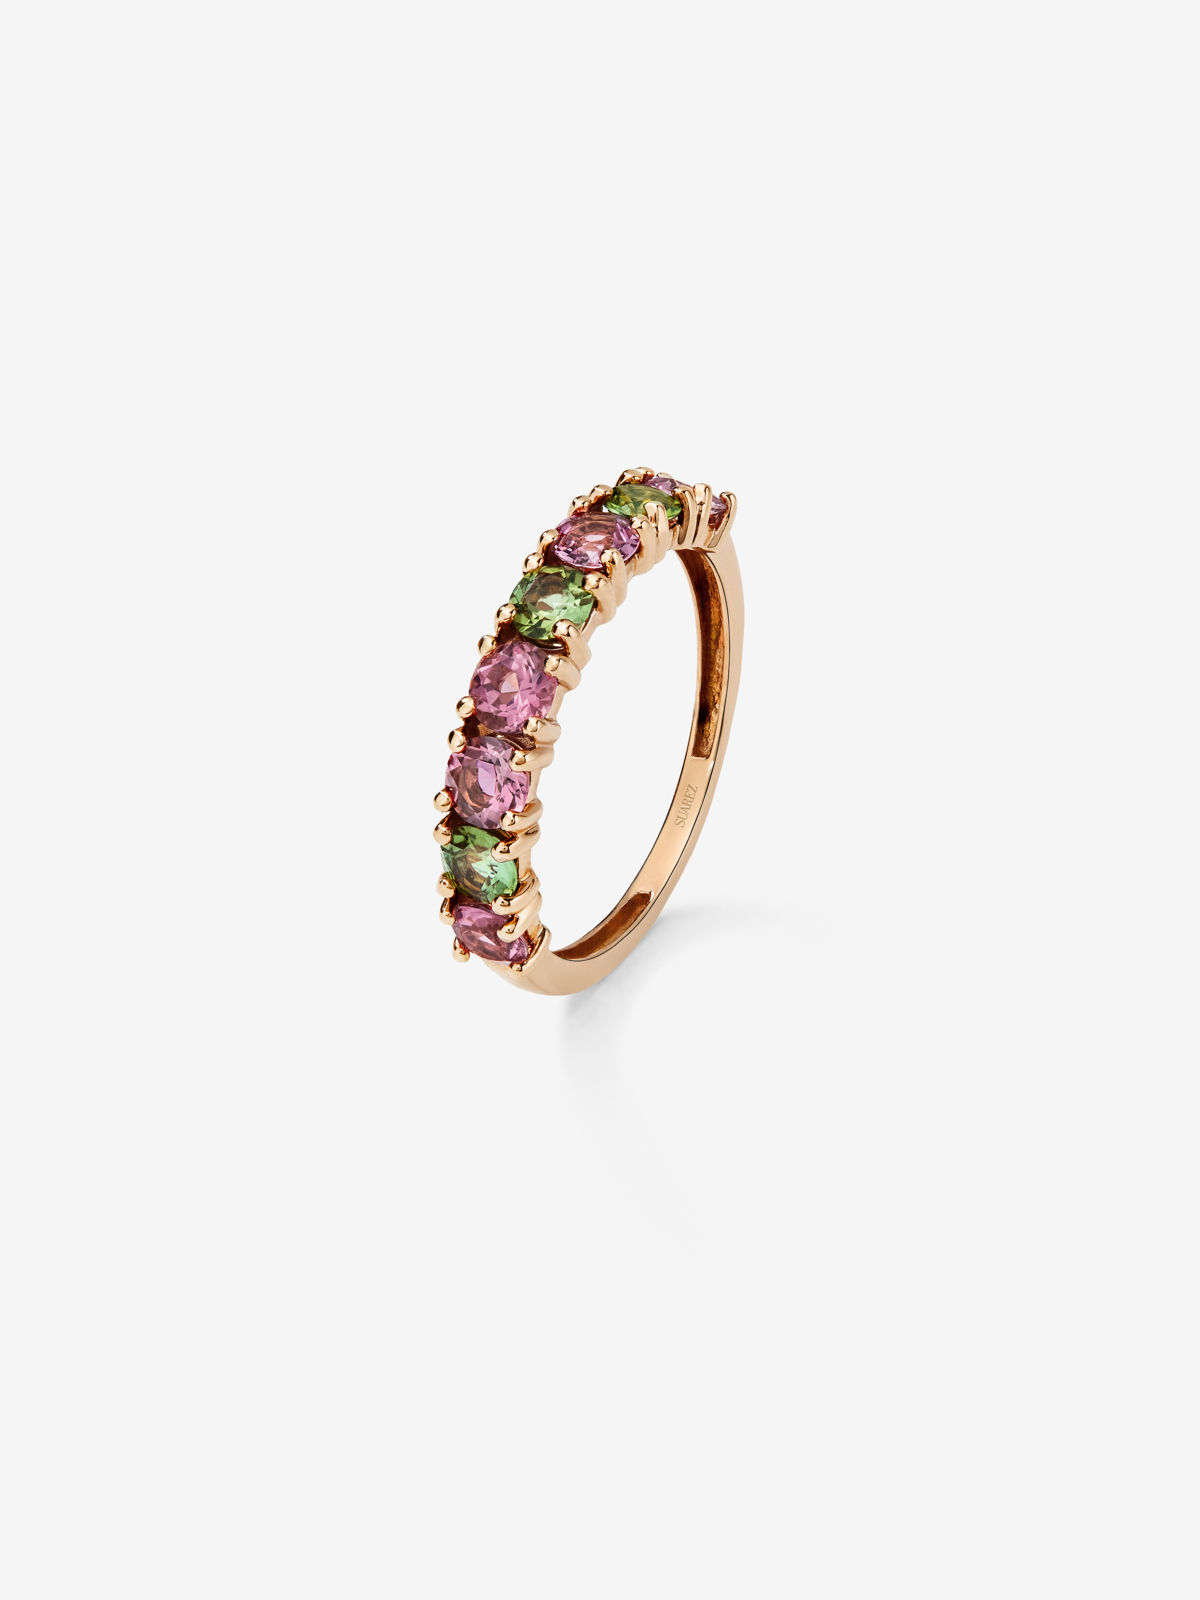 Half-eternity ring in 18K rose gold with tourmaline